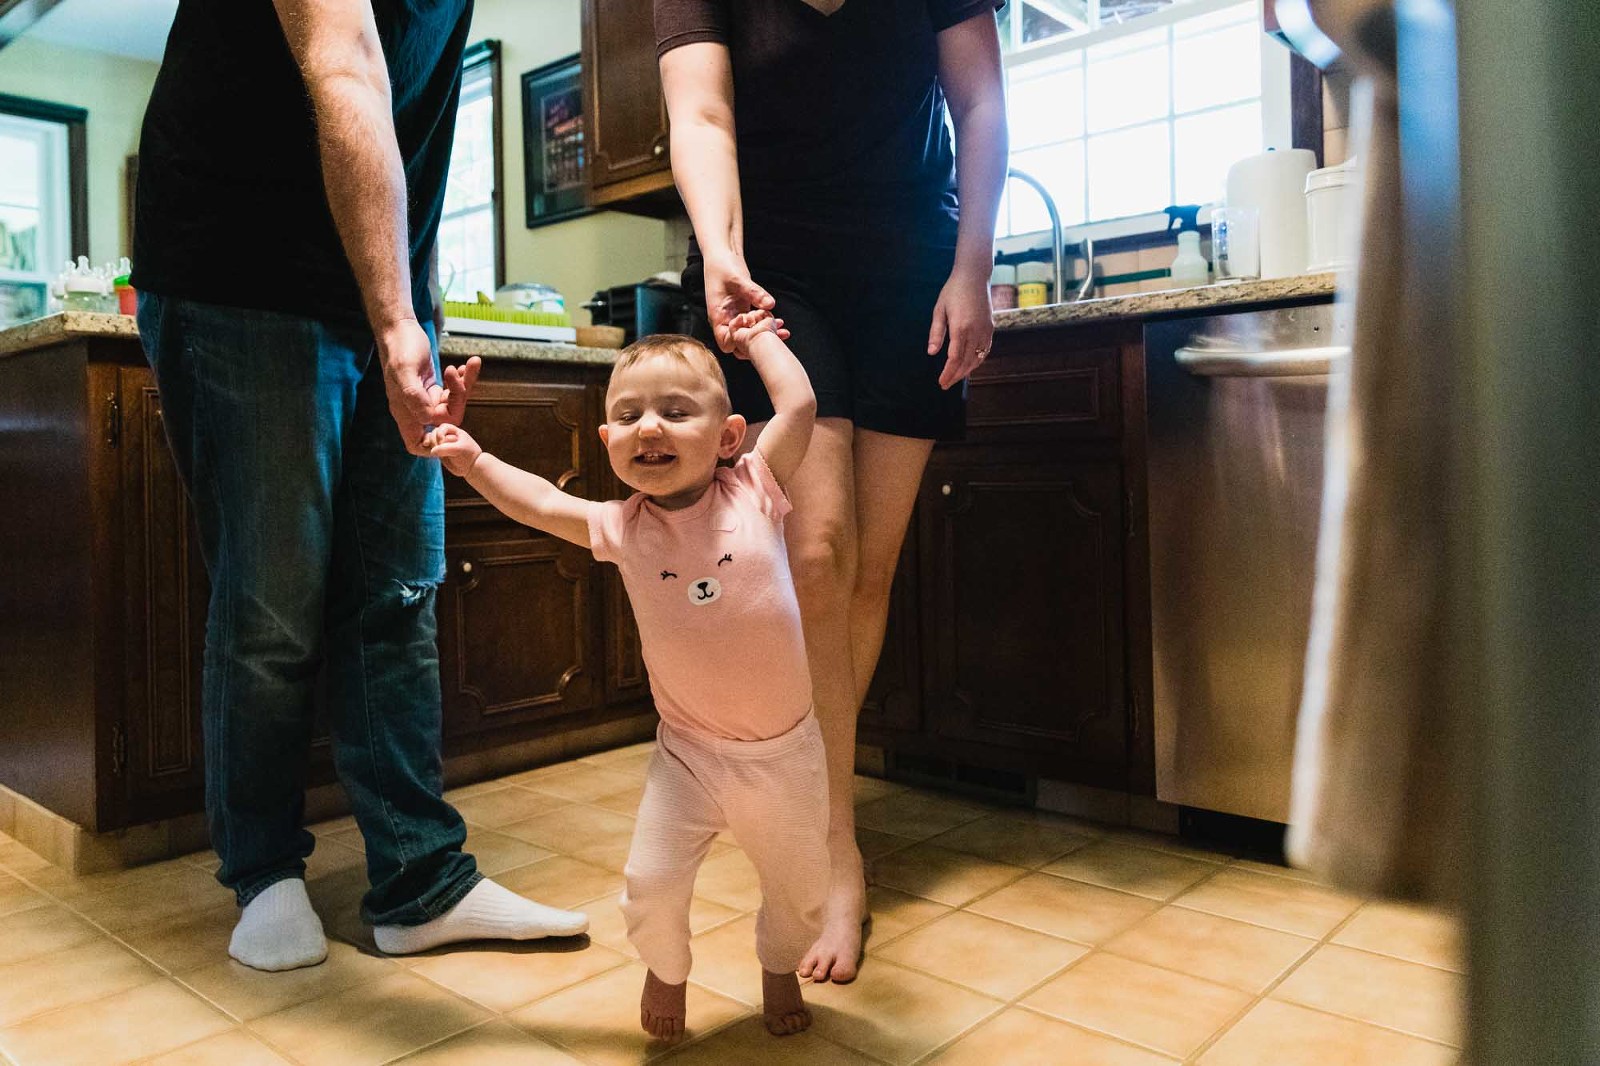 baby learning to walk holds onto mom and dad's hands as she walks through her kitchen